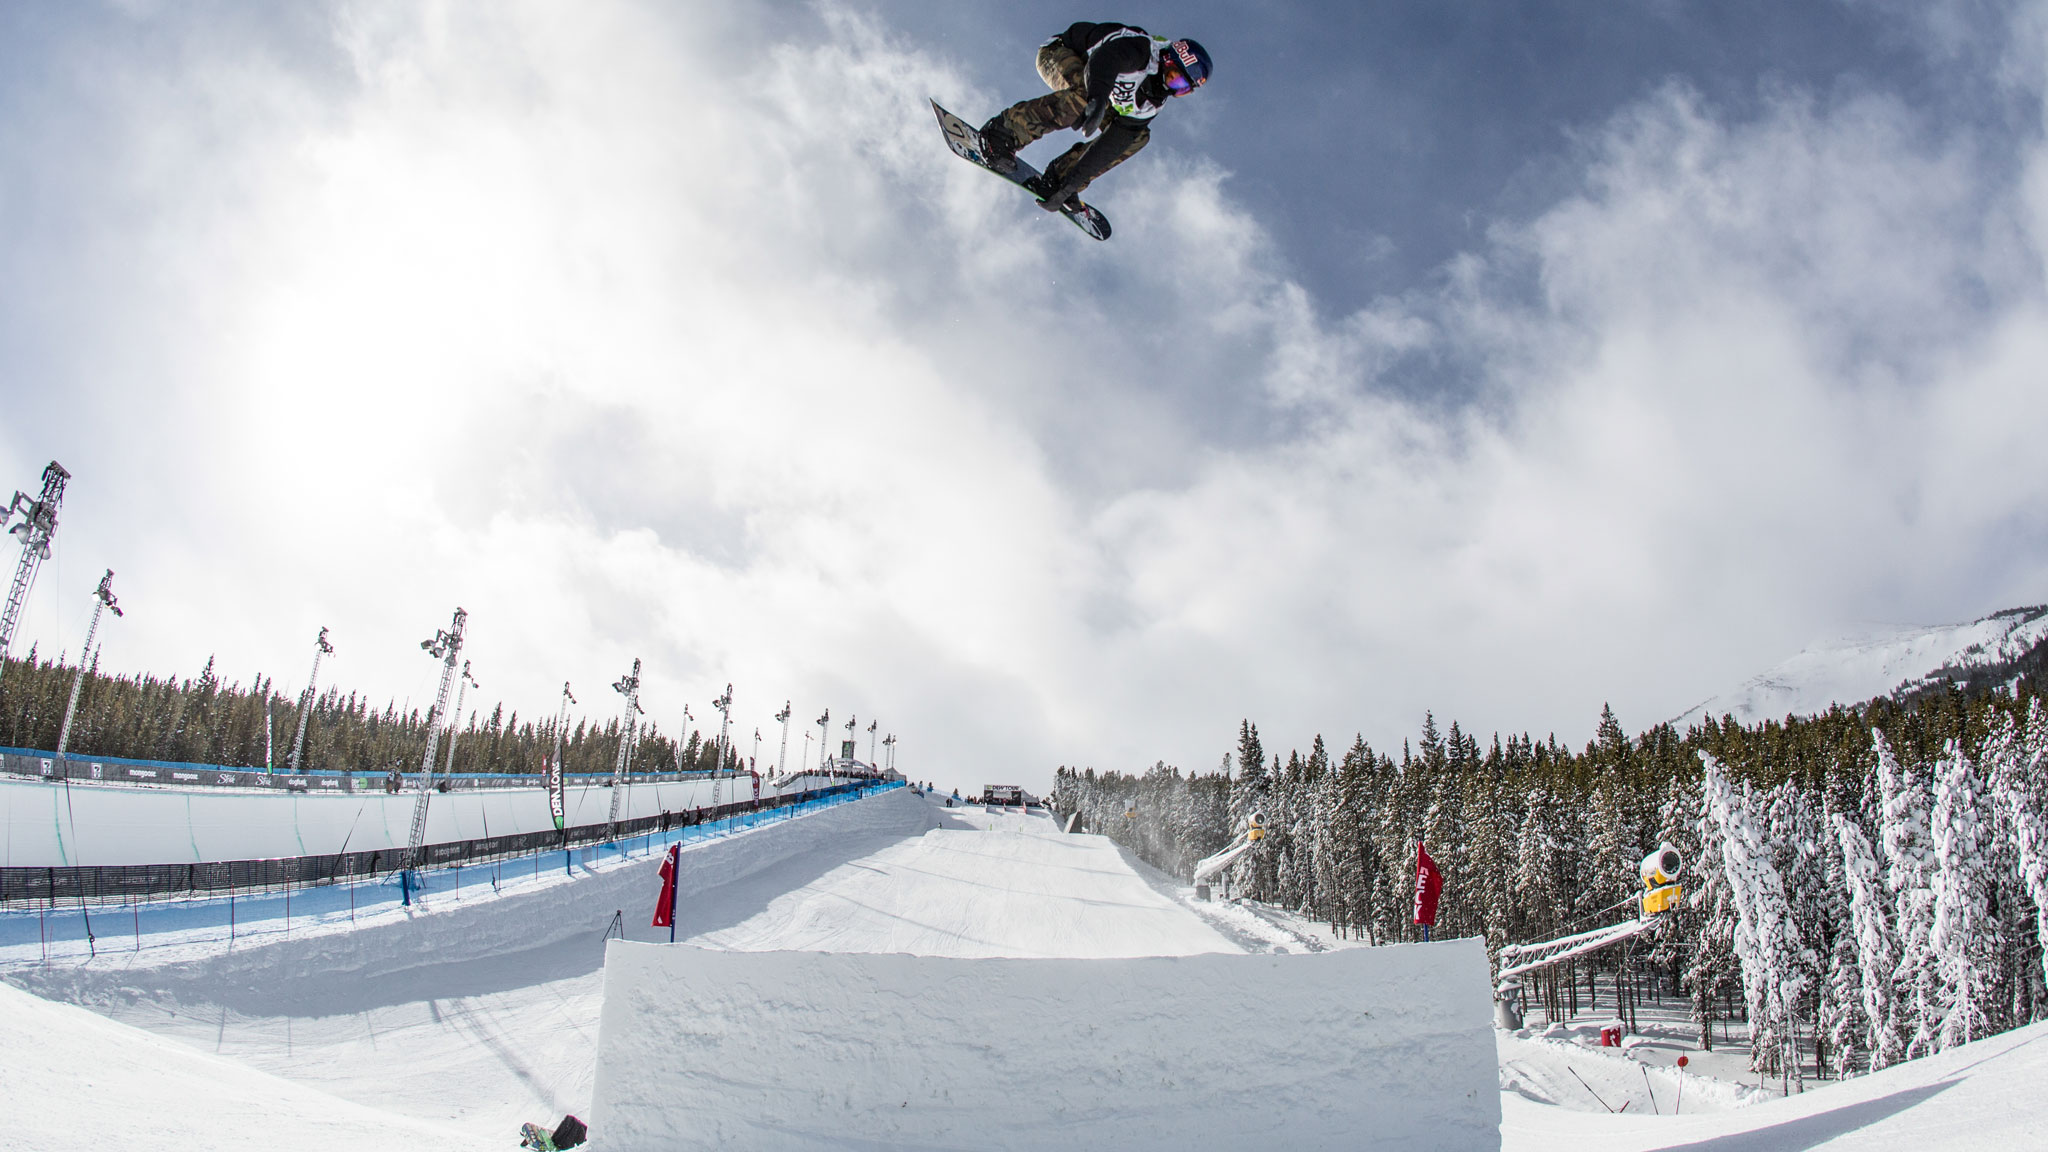 Mark Mcmorris Tom Wallisch David Wise Are Athletes To Watch At X